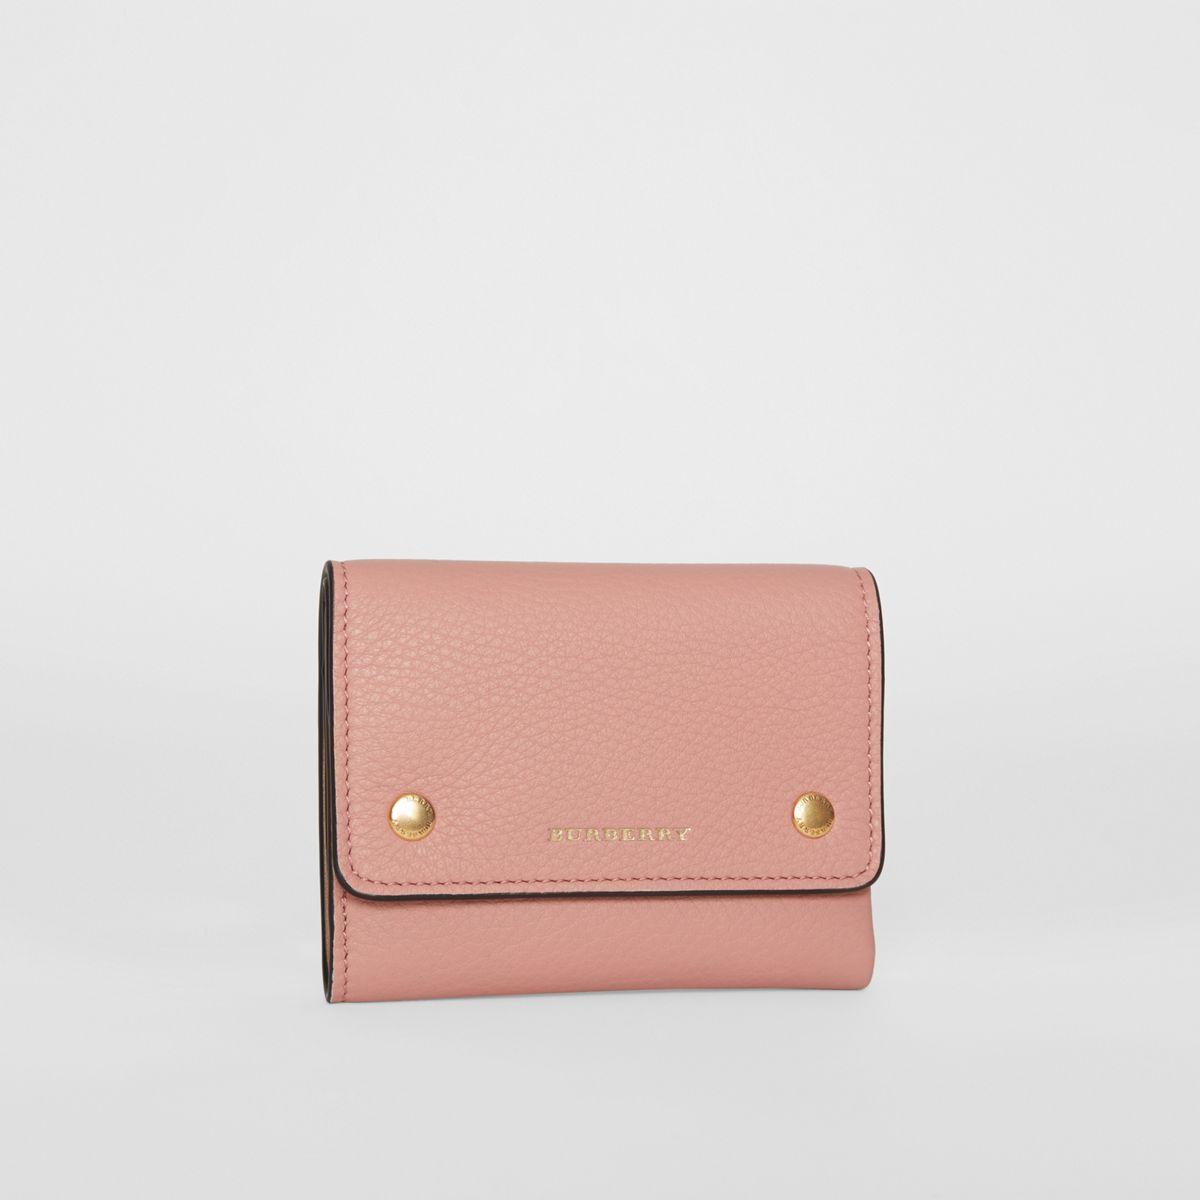 Burberry Small Leather Folding Wallet in Ash Rose (Pink) - Lyst